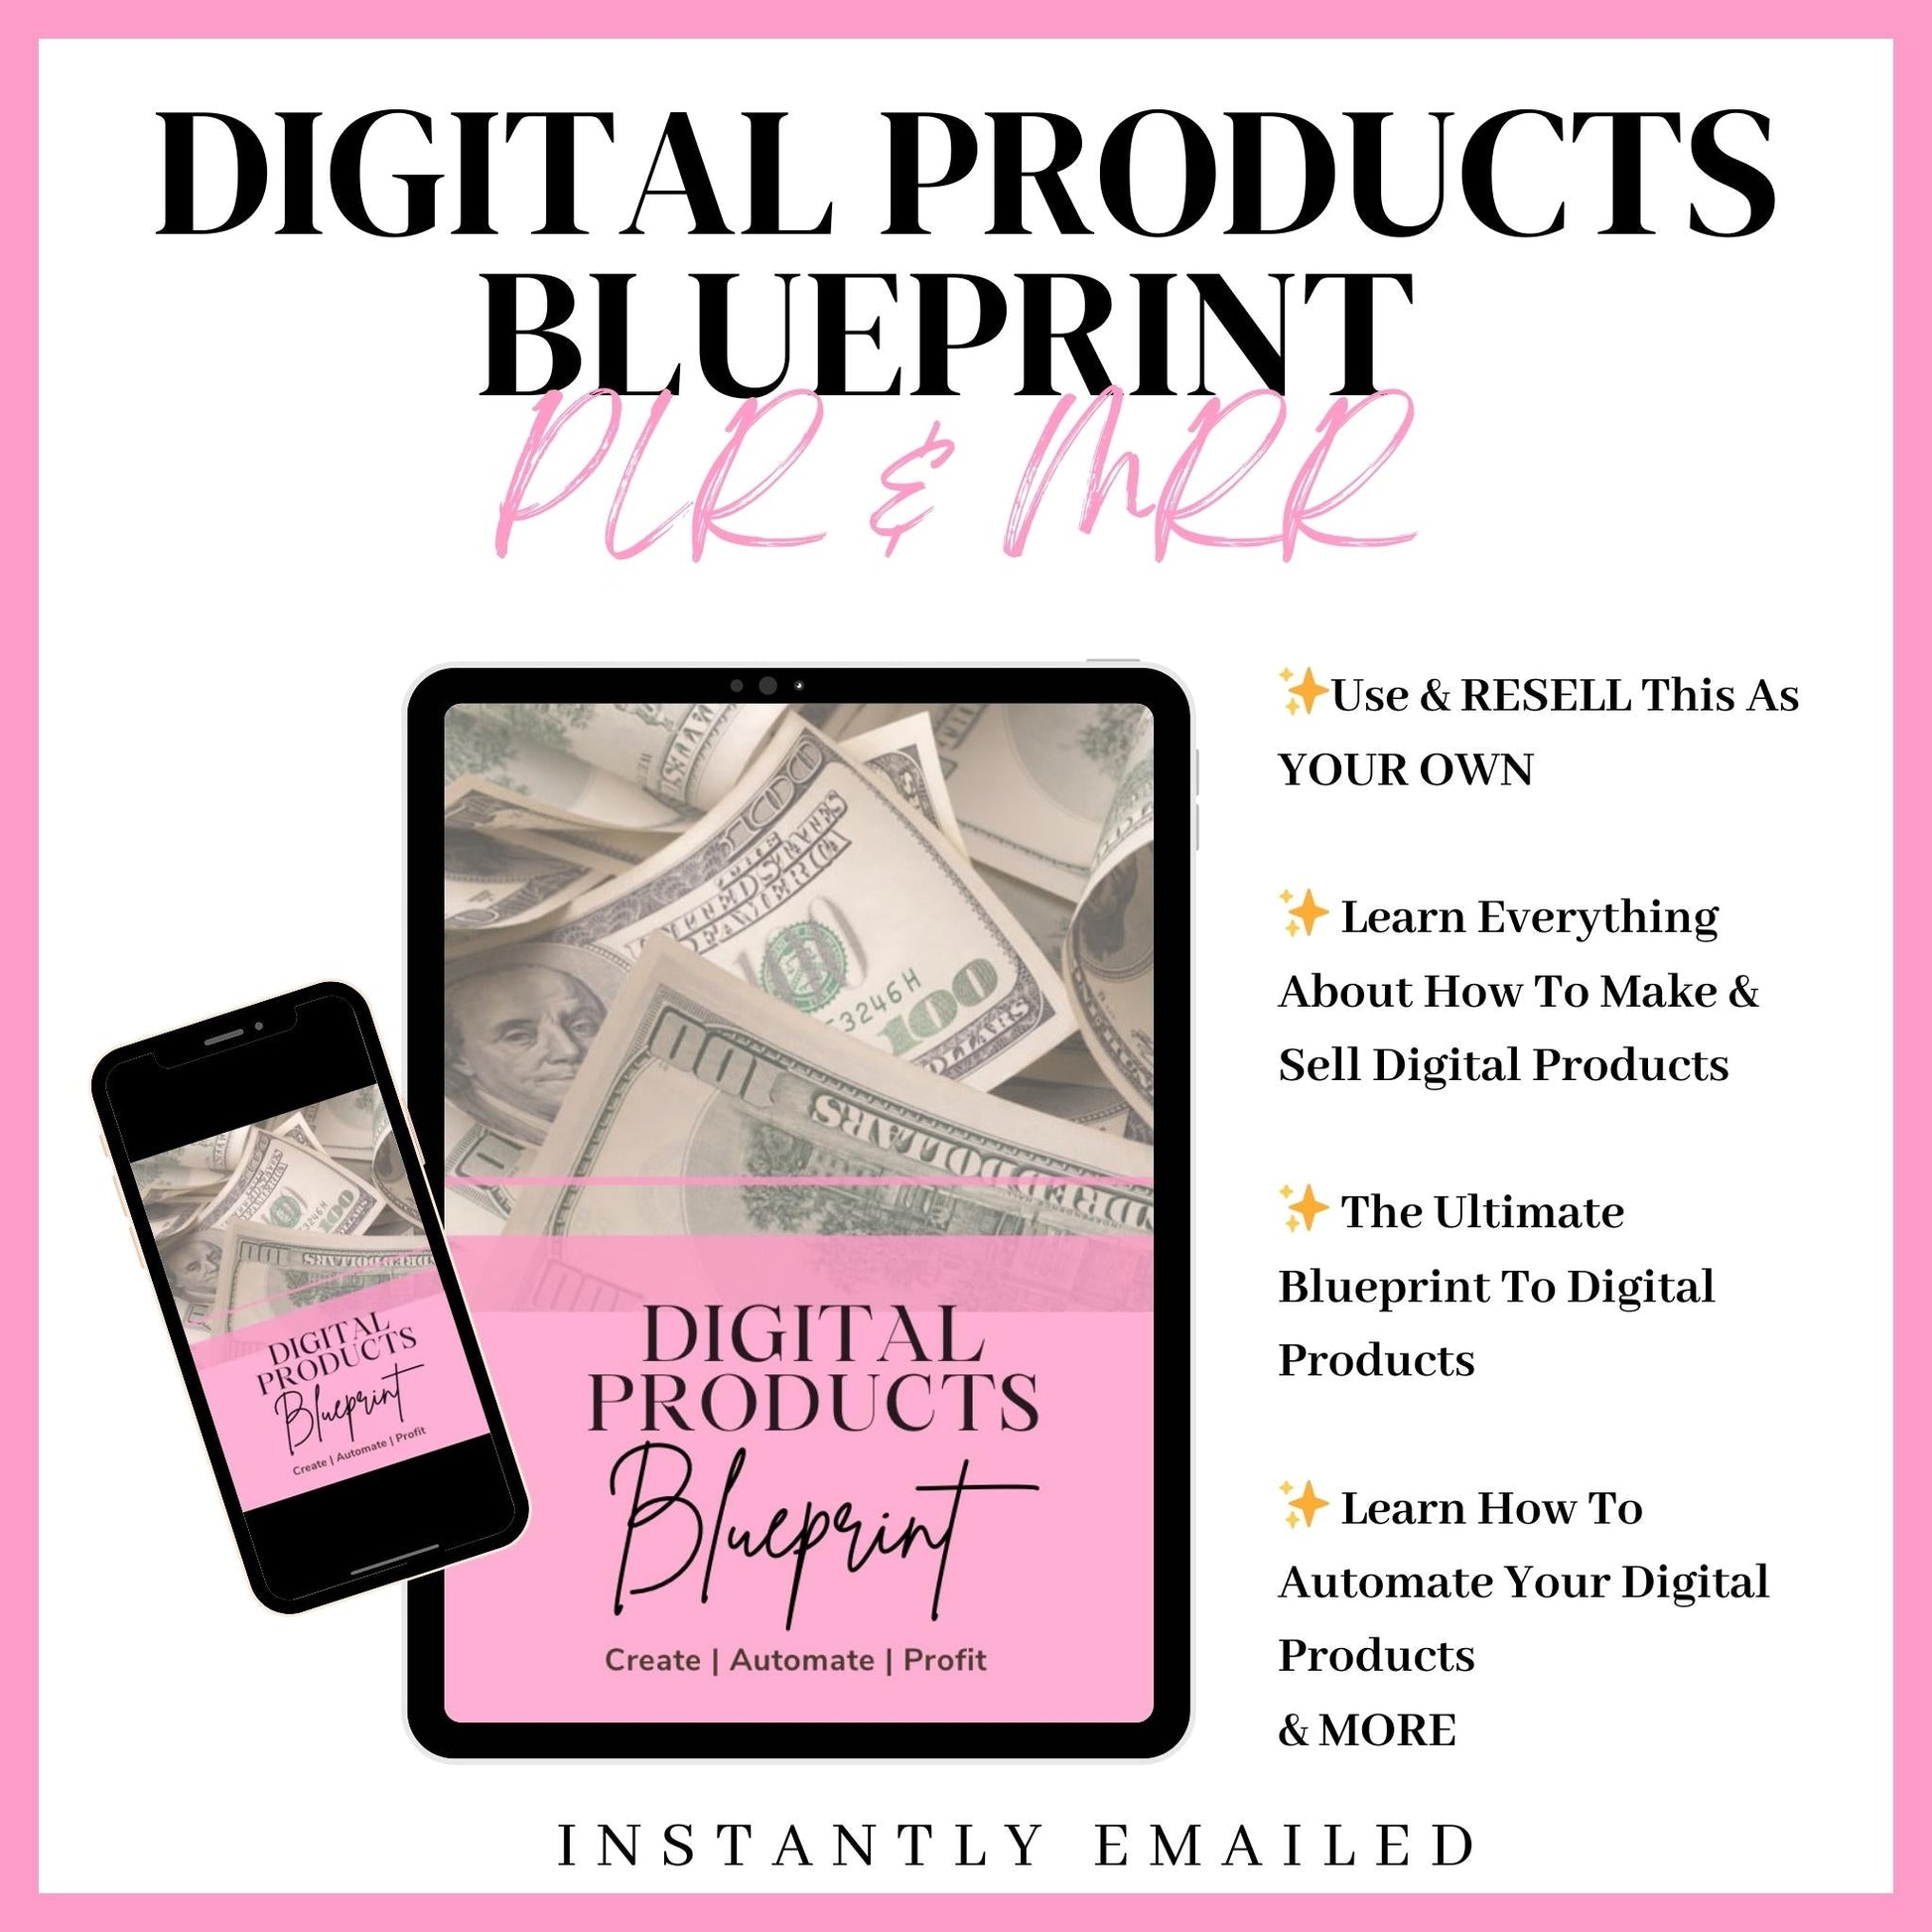 DFY Digital Products Blue Print Ebook - The Self Made CEO -